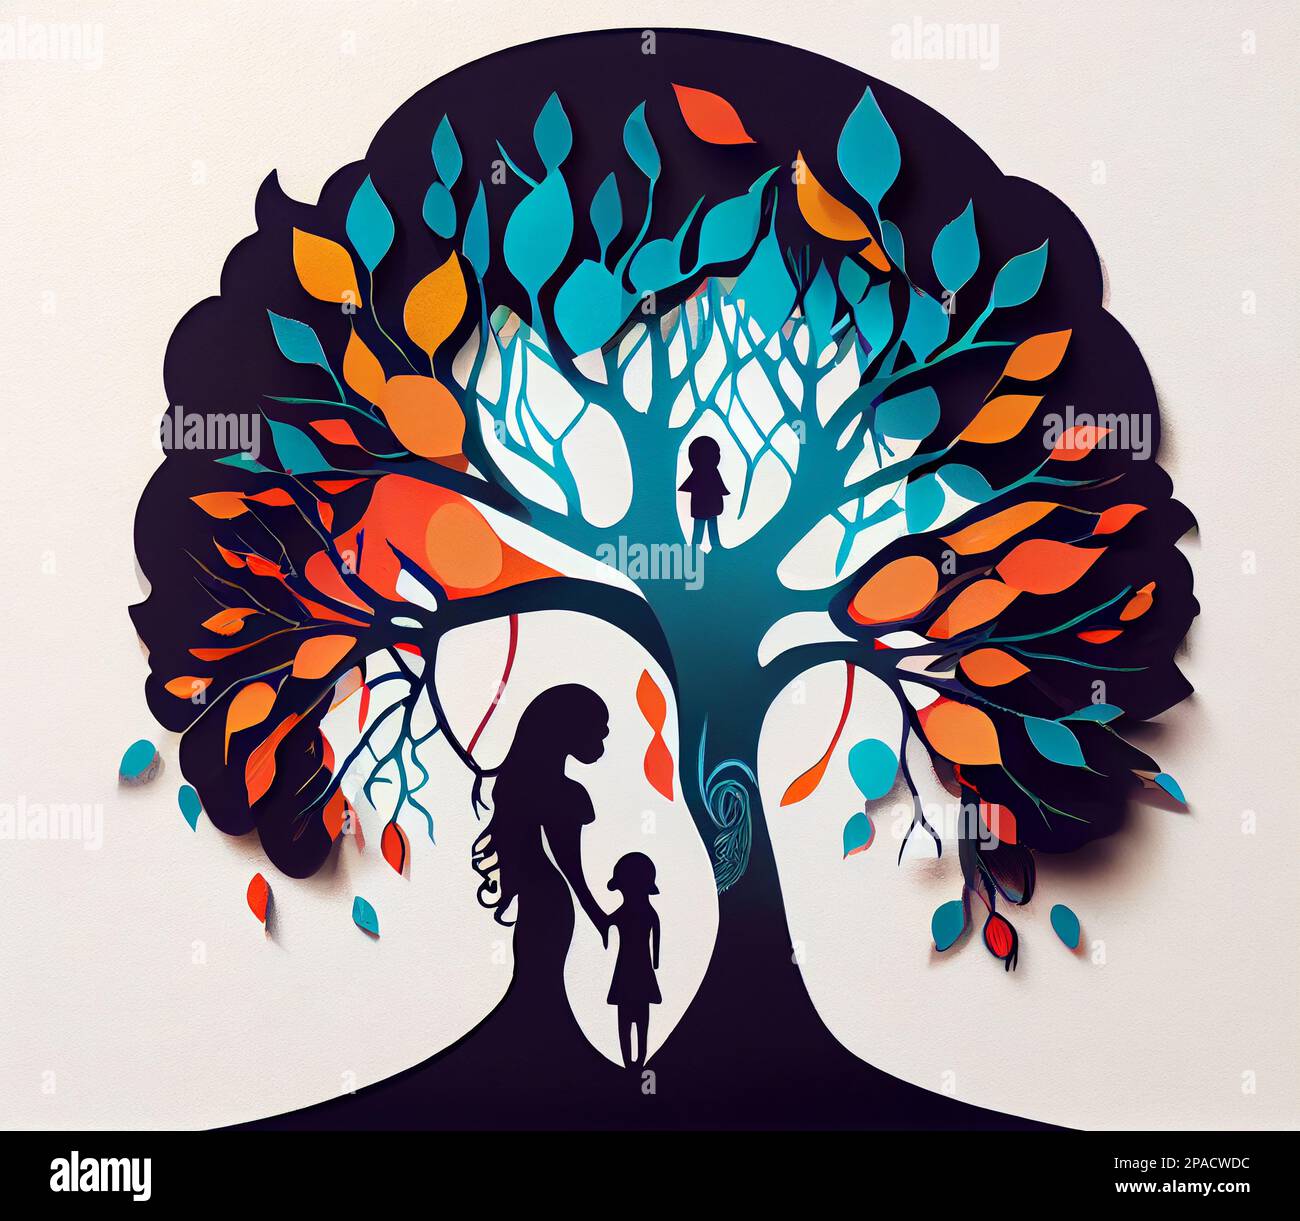 A creative and imaginative paper art representation of a mother and child sharing a special moment together, with colorful and intricate designs. Gene Stock Photo